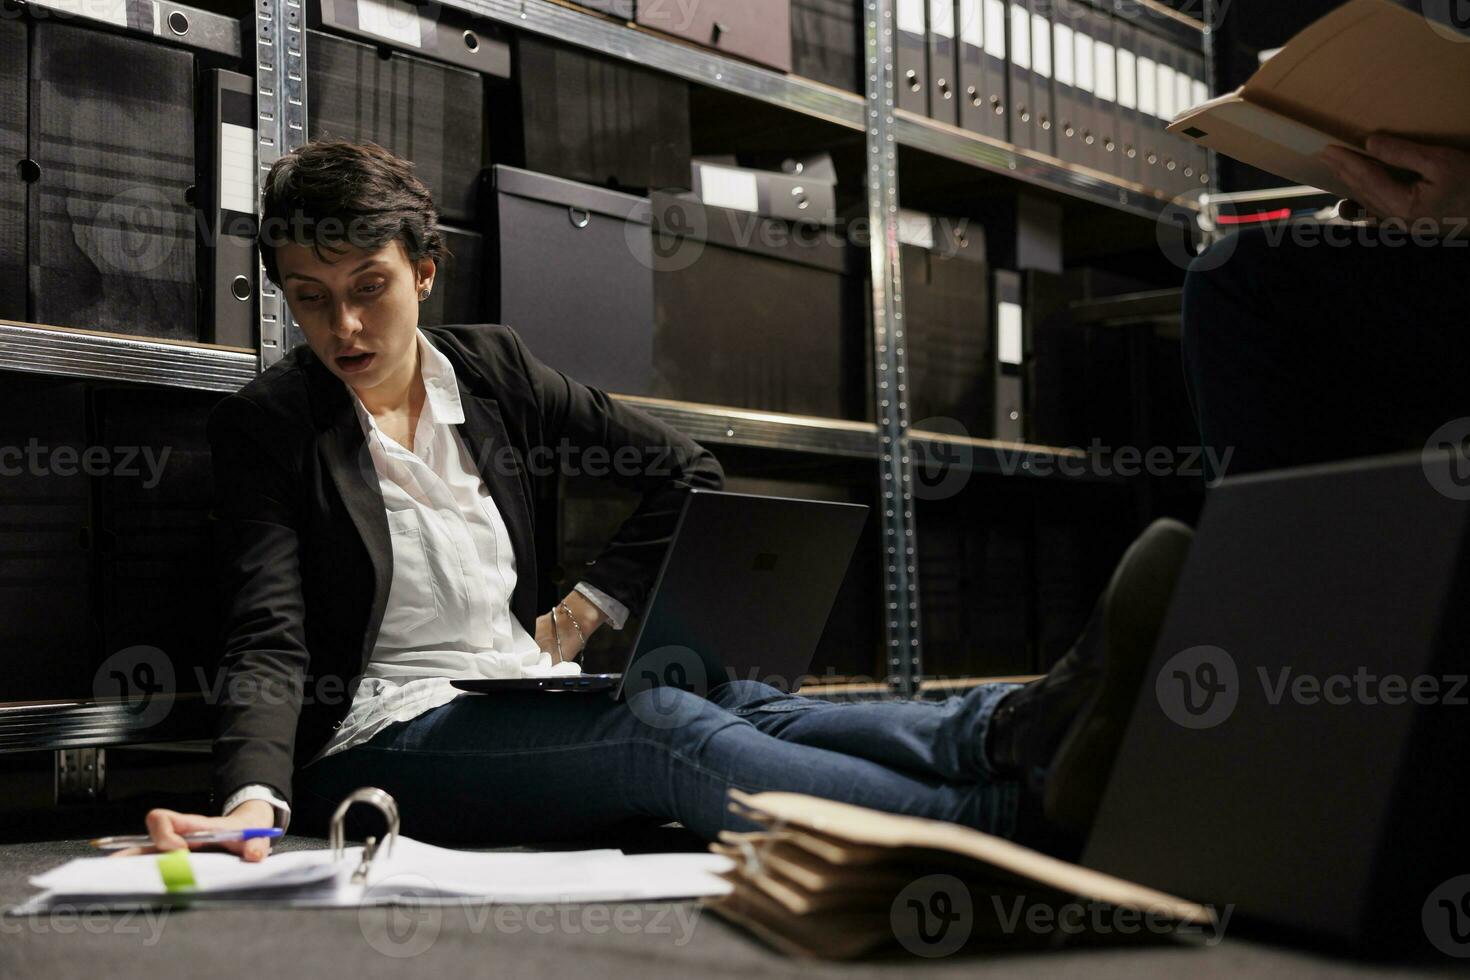 Overworked inspector sitting on floor in arhive room, analyzing criminology report. Private detectives working overhours at criminal case, checking crime scene evidence trying to catch suspect photo